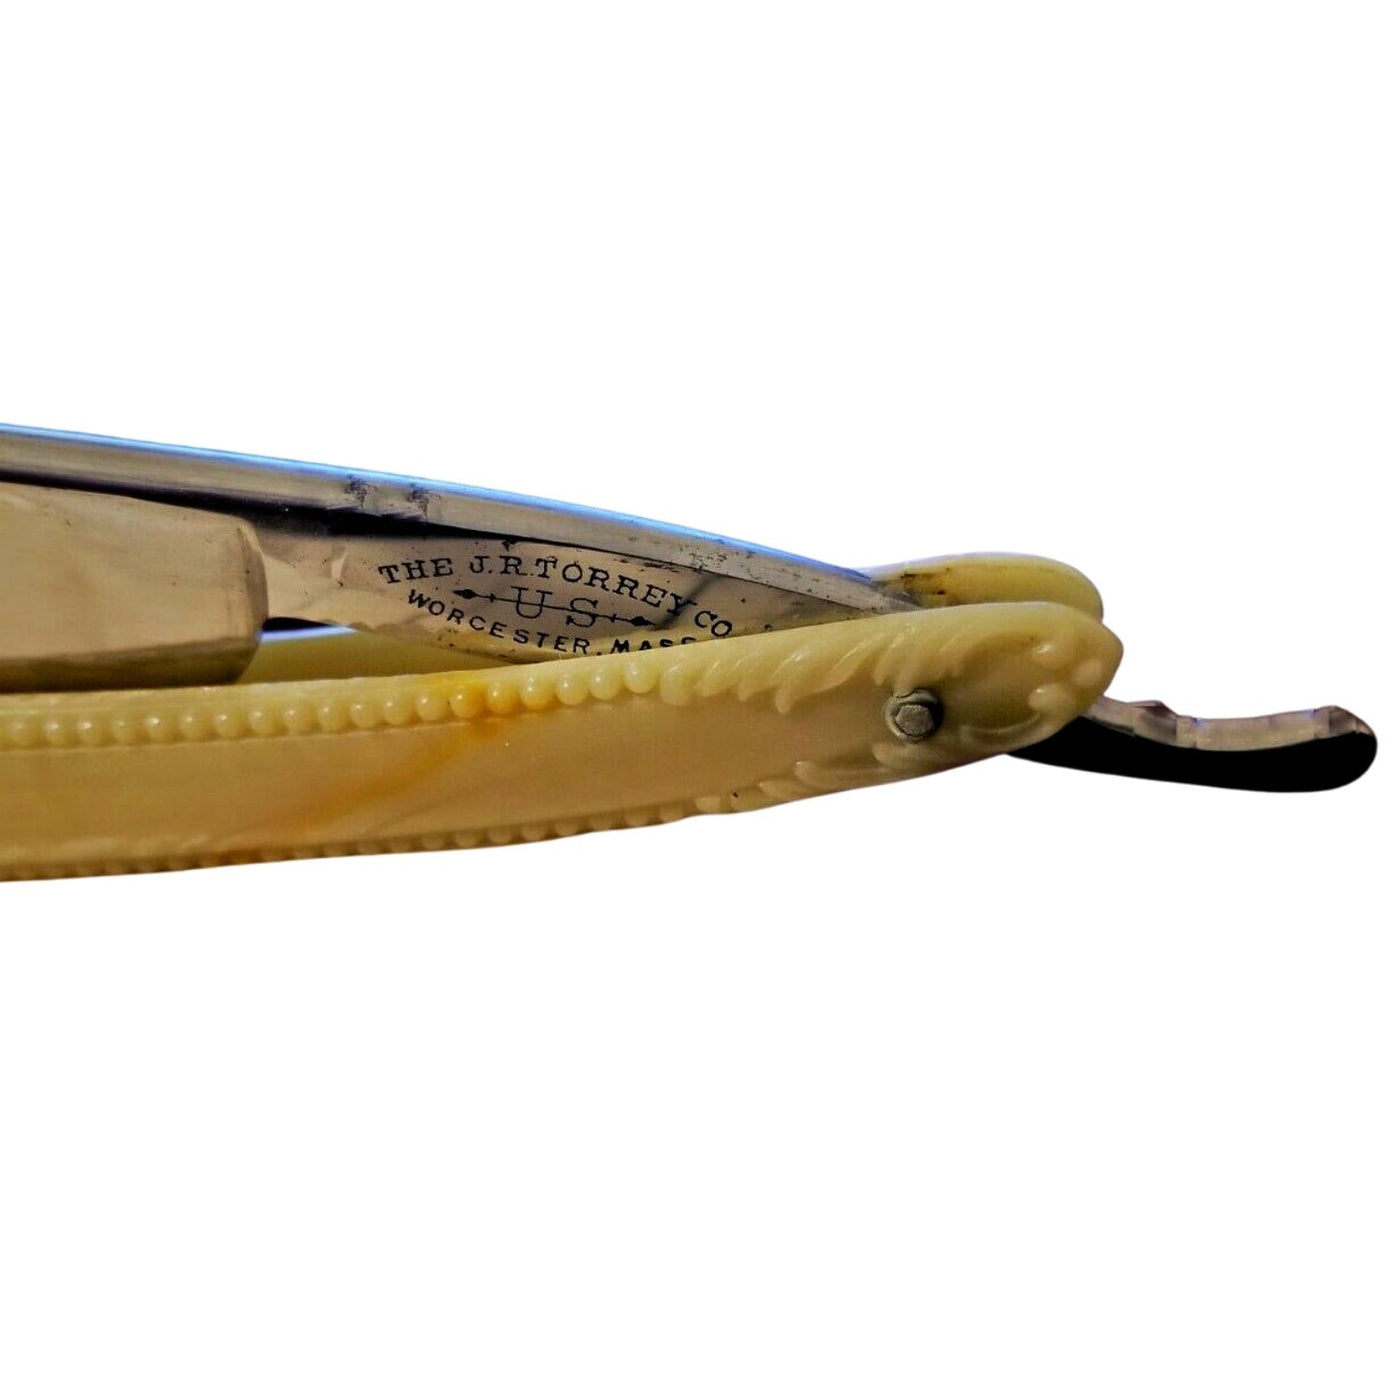  Vintage J.R. Torrey Straight Razor by Naked Armor sold by Naked Armor Razors